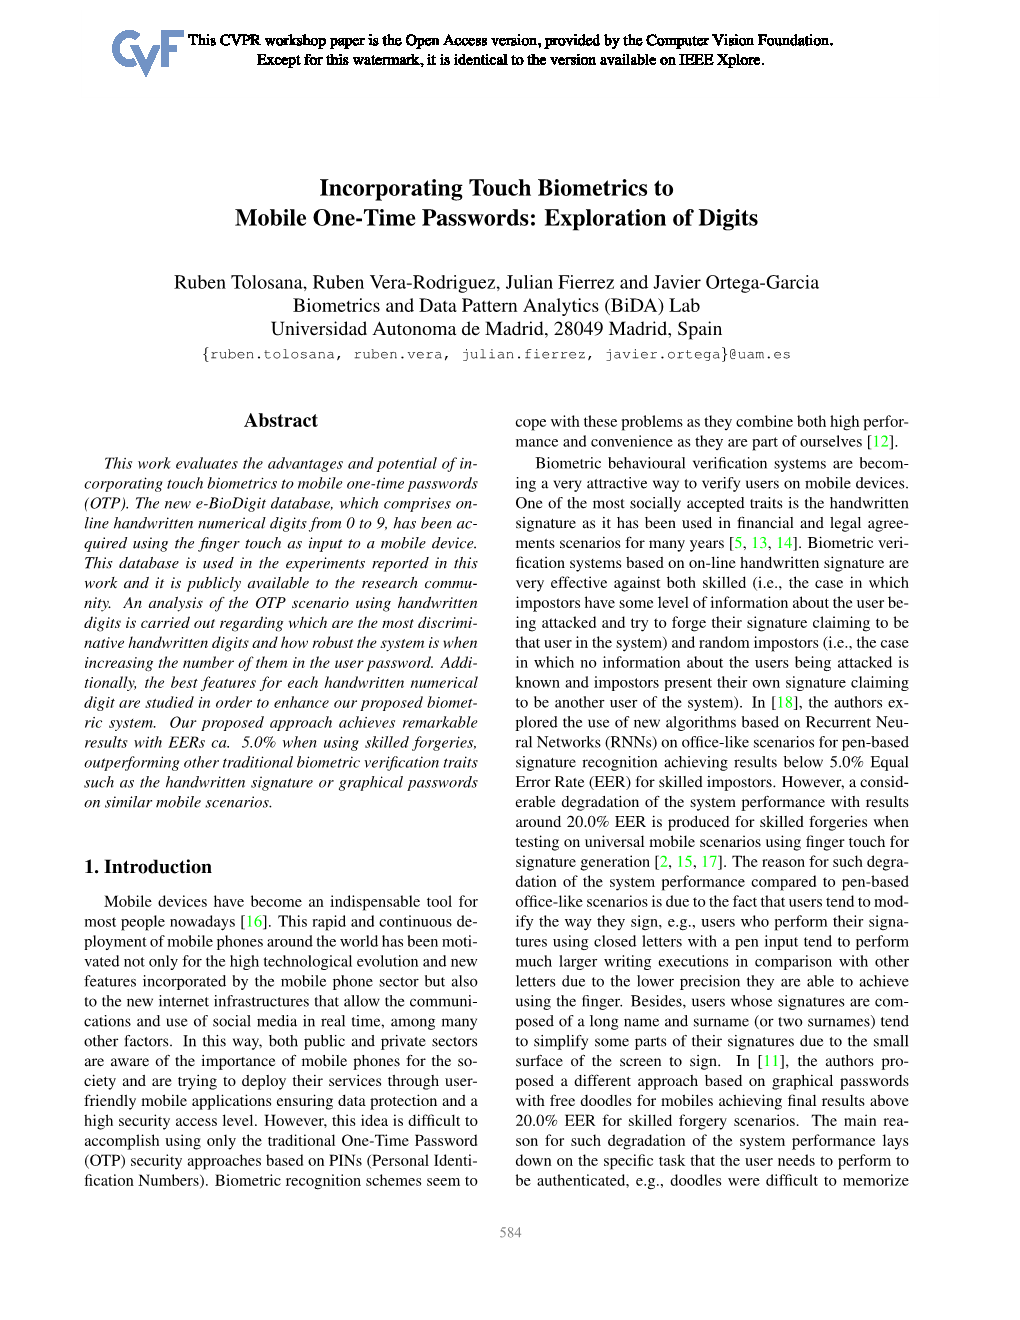 Incorporating Touch Biometrics to Mobile One-Time Passwords: Exploration of Digits